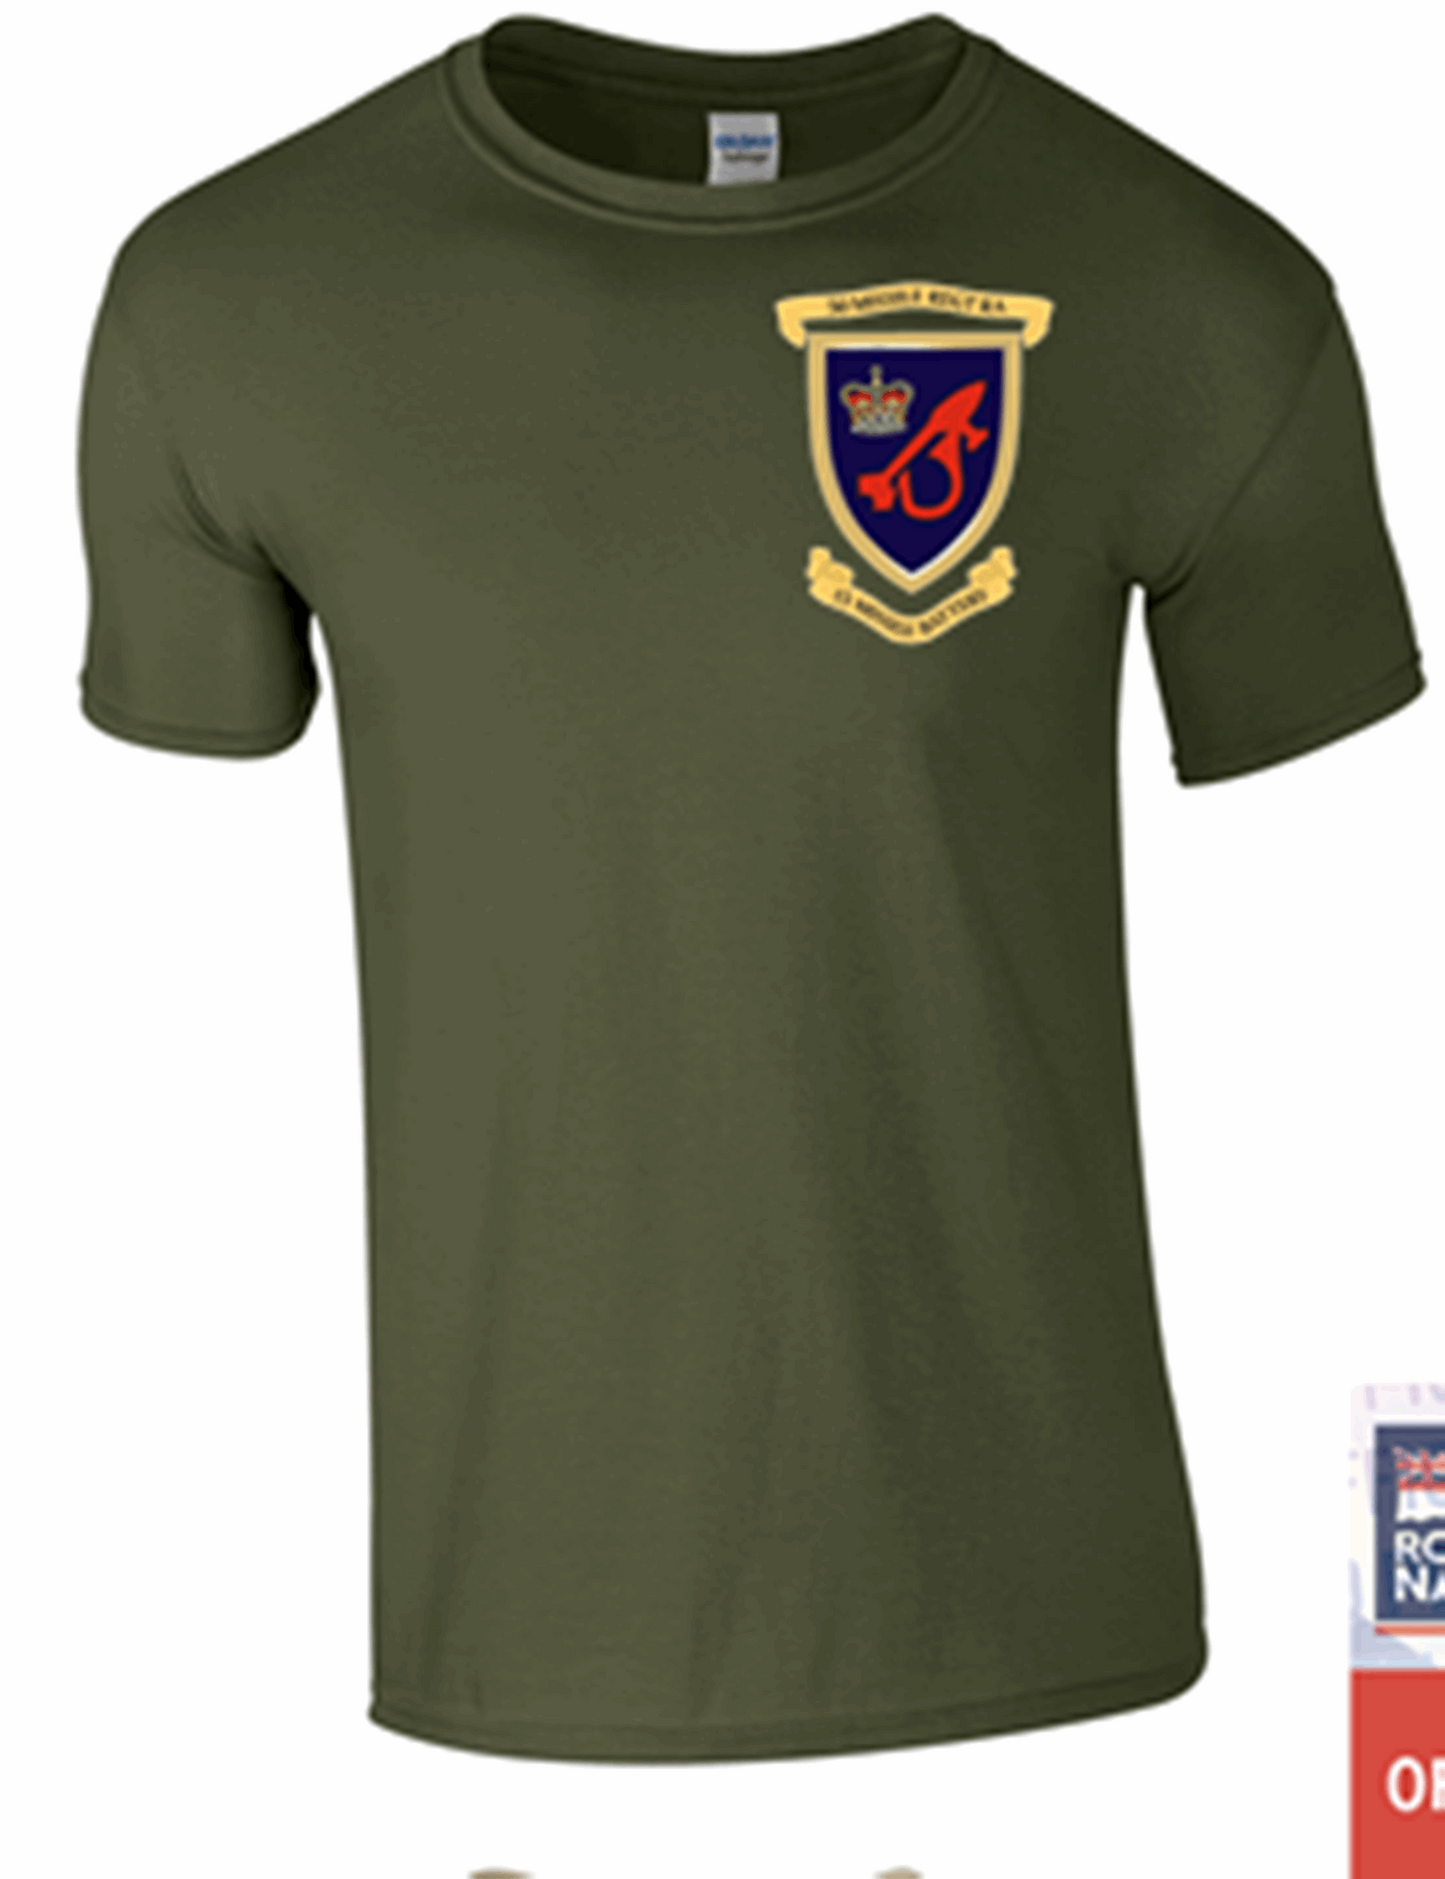 15 Missile Battery T-Shirt RA Front Only - Army 1157 kit S / GREEN Army 1157 Kit Veterans Owned Business